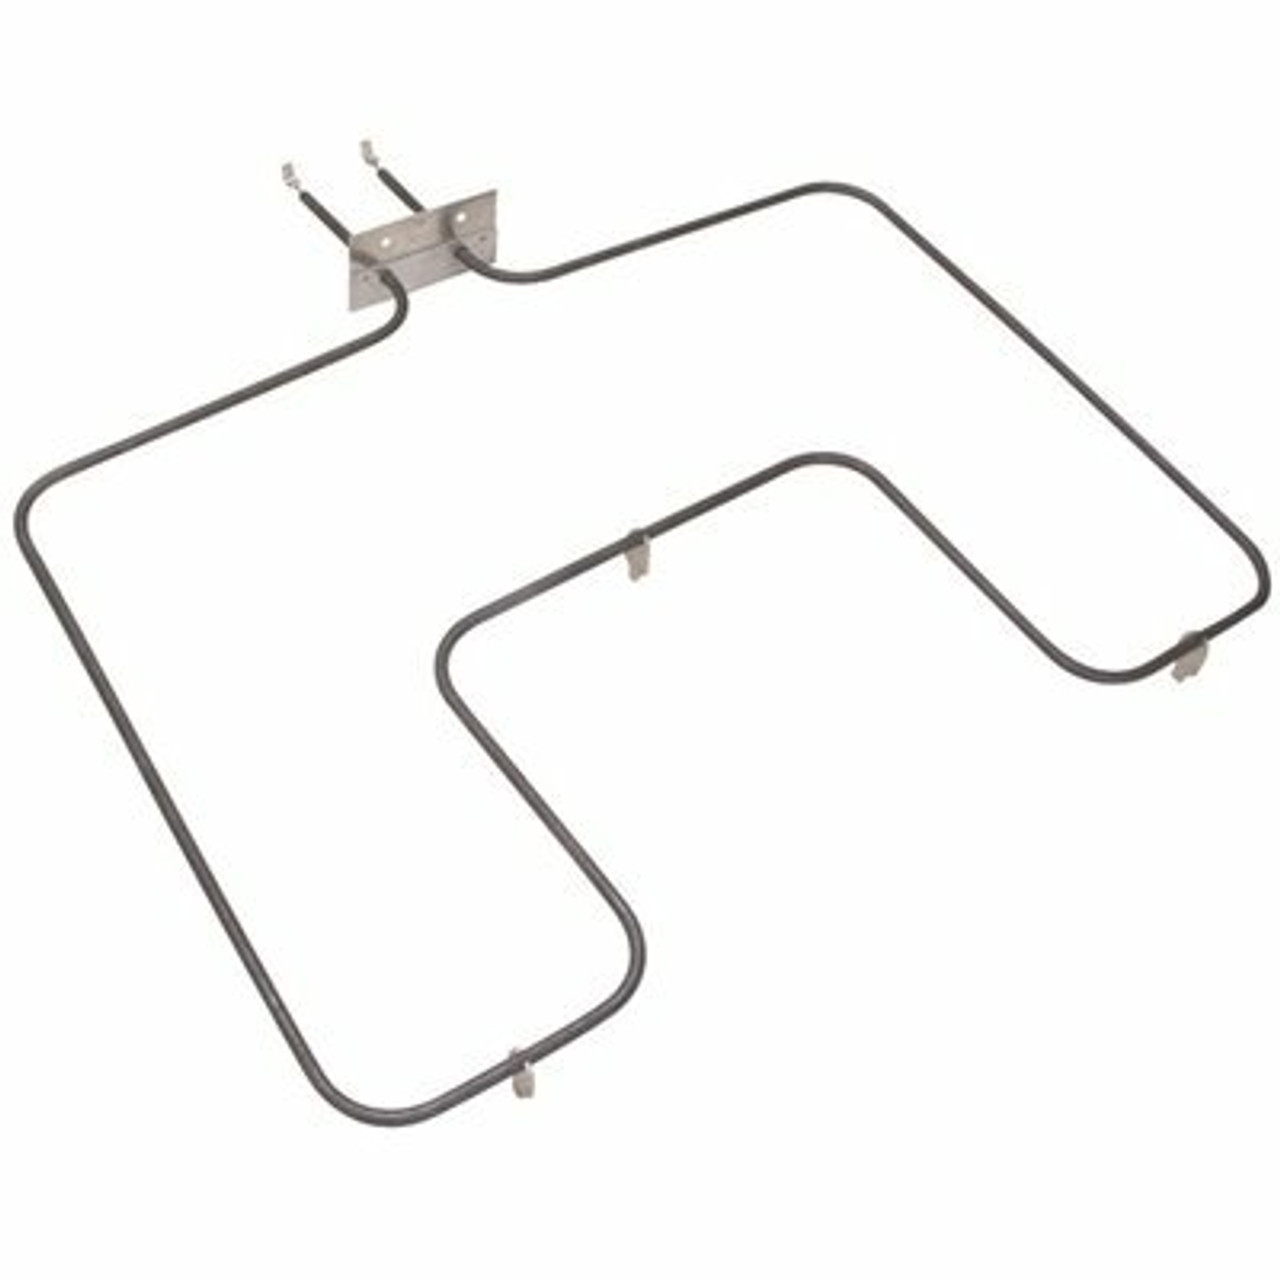 Exact Replacement Parts Bake Element - 309126688